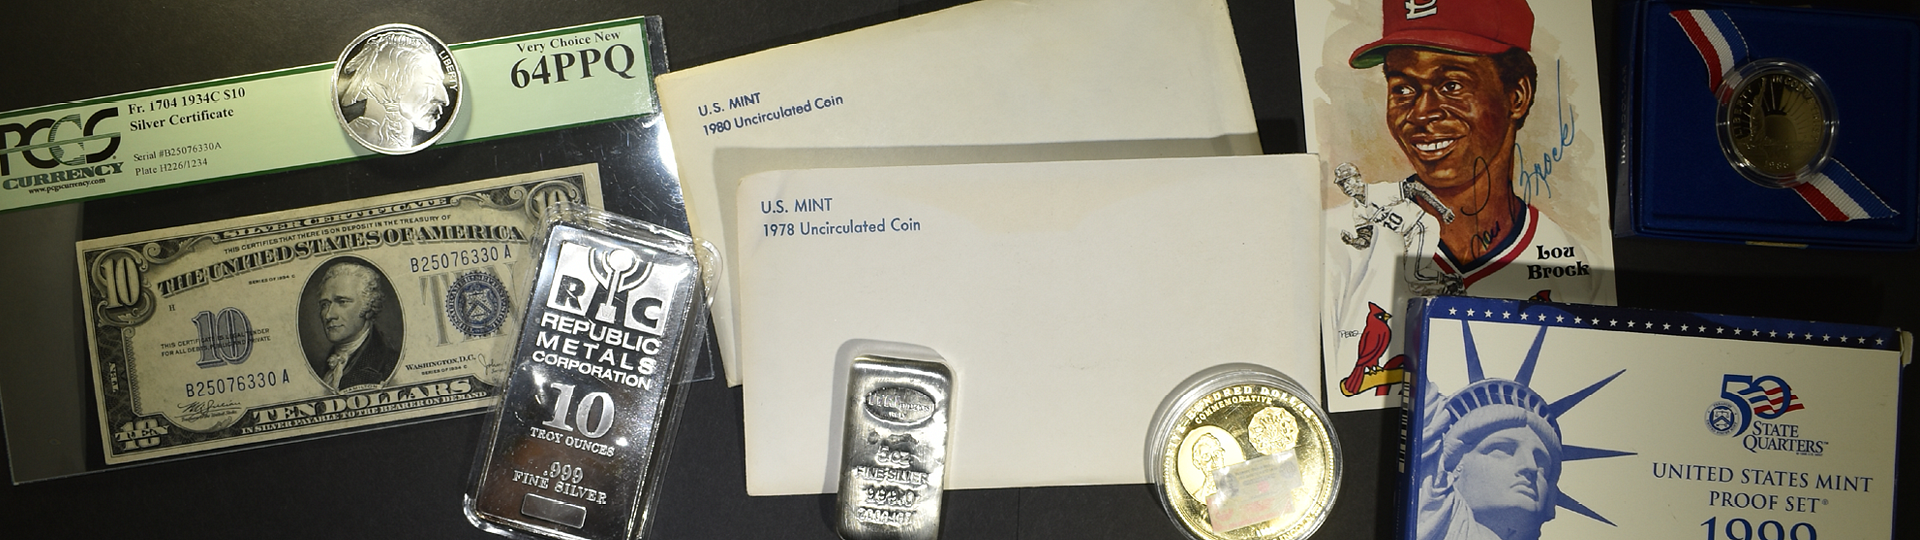 February 13th Silver City Rare Coins & Currency by Silver City Auctions